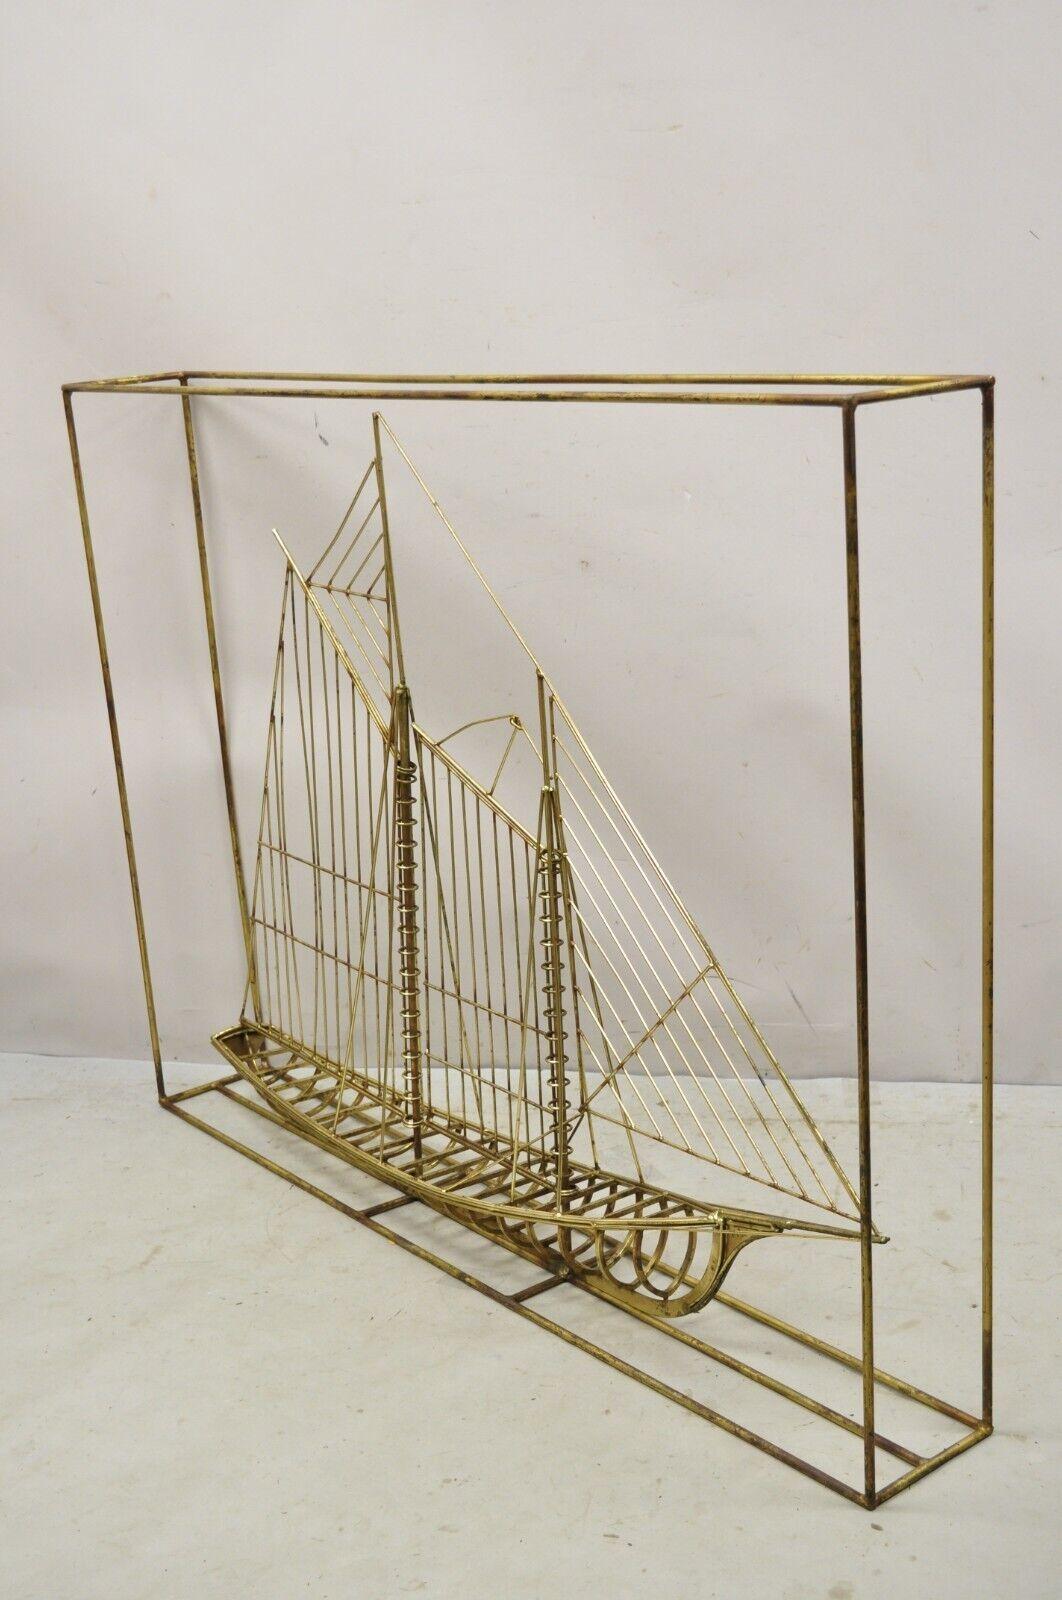 Large Curtis Jere metal clipper ship 3D Sailboat Mid-Century Modern sculpture. Item features is a large impressive size, 3 dimensional design, wire metal construction, original signature, very nice vintage item, great style and form. Signed by